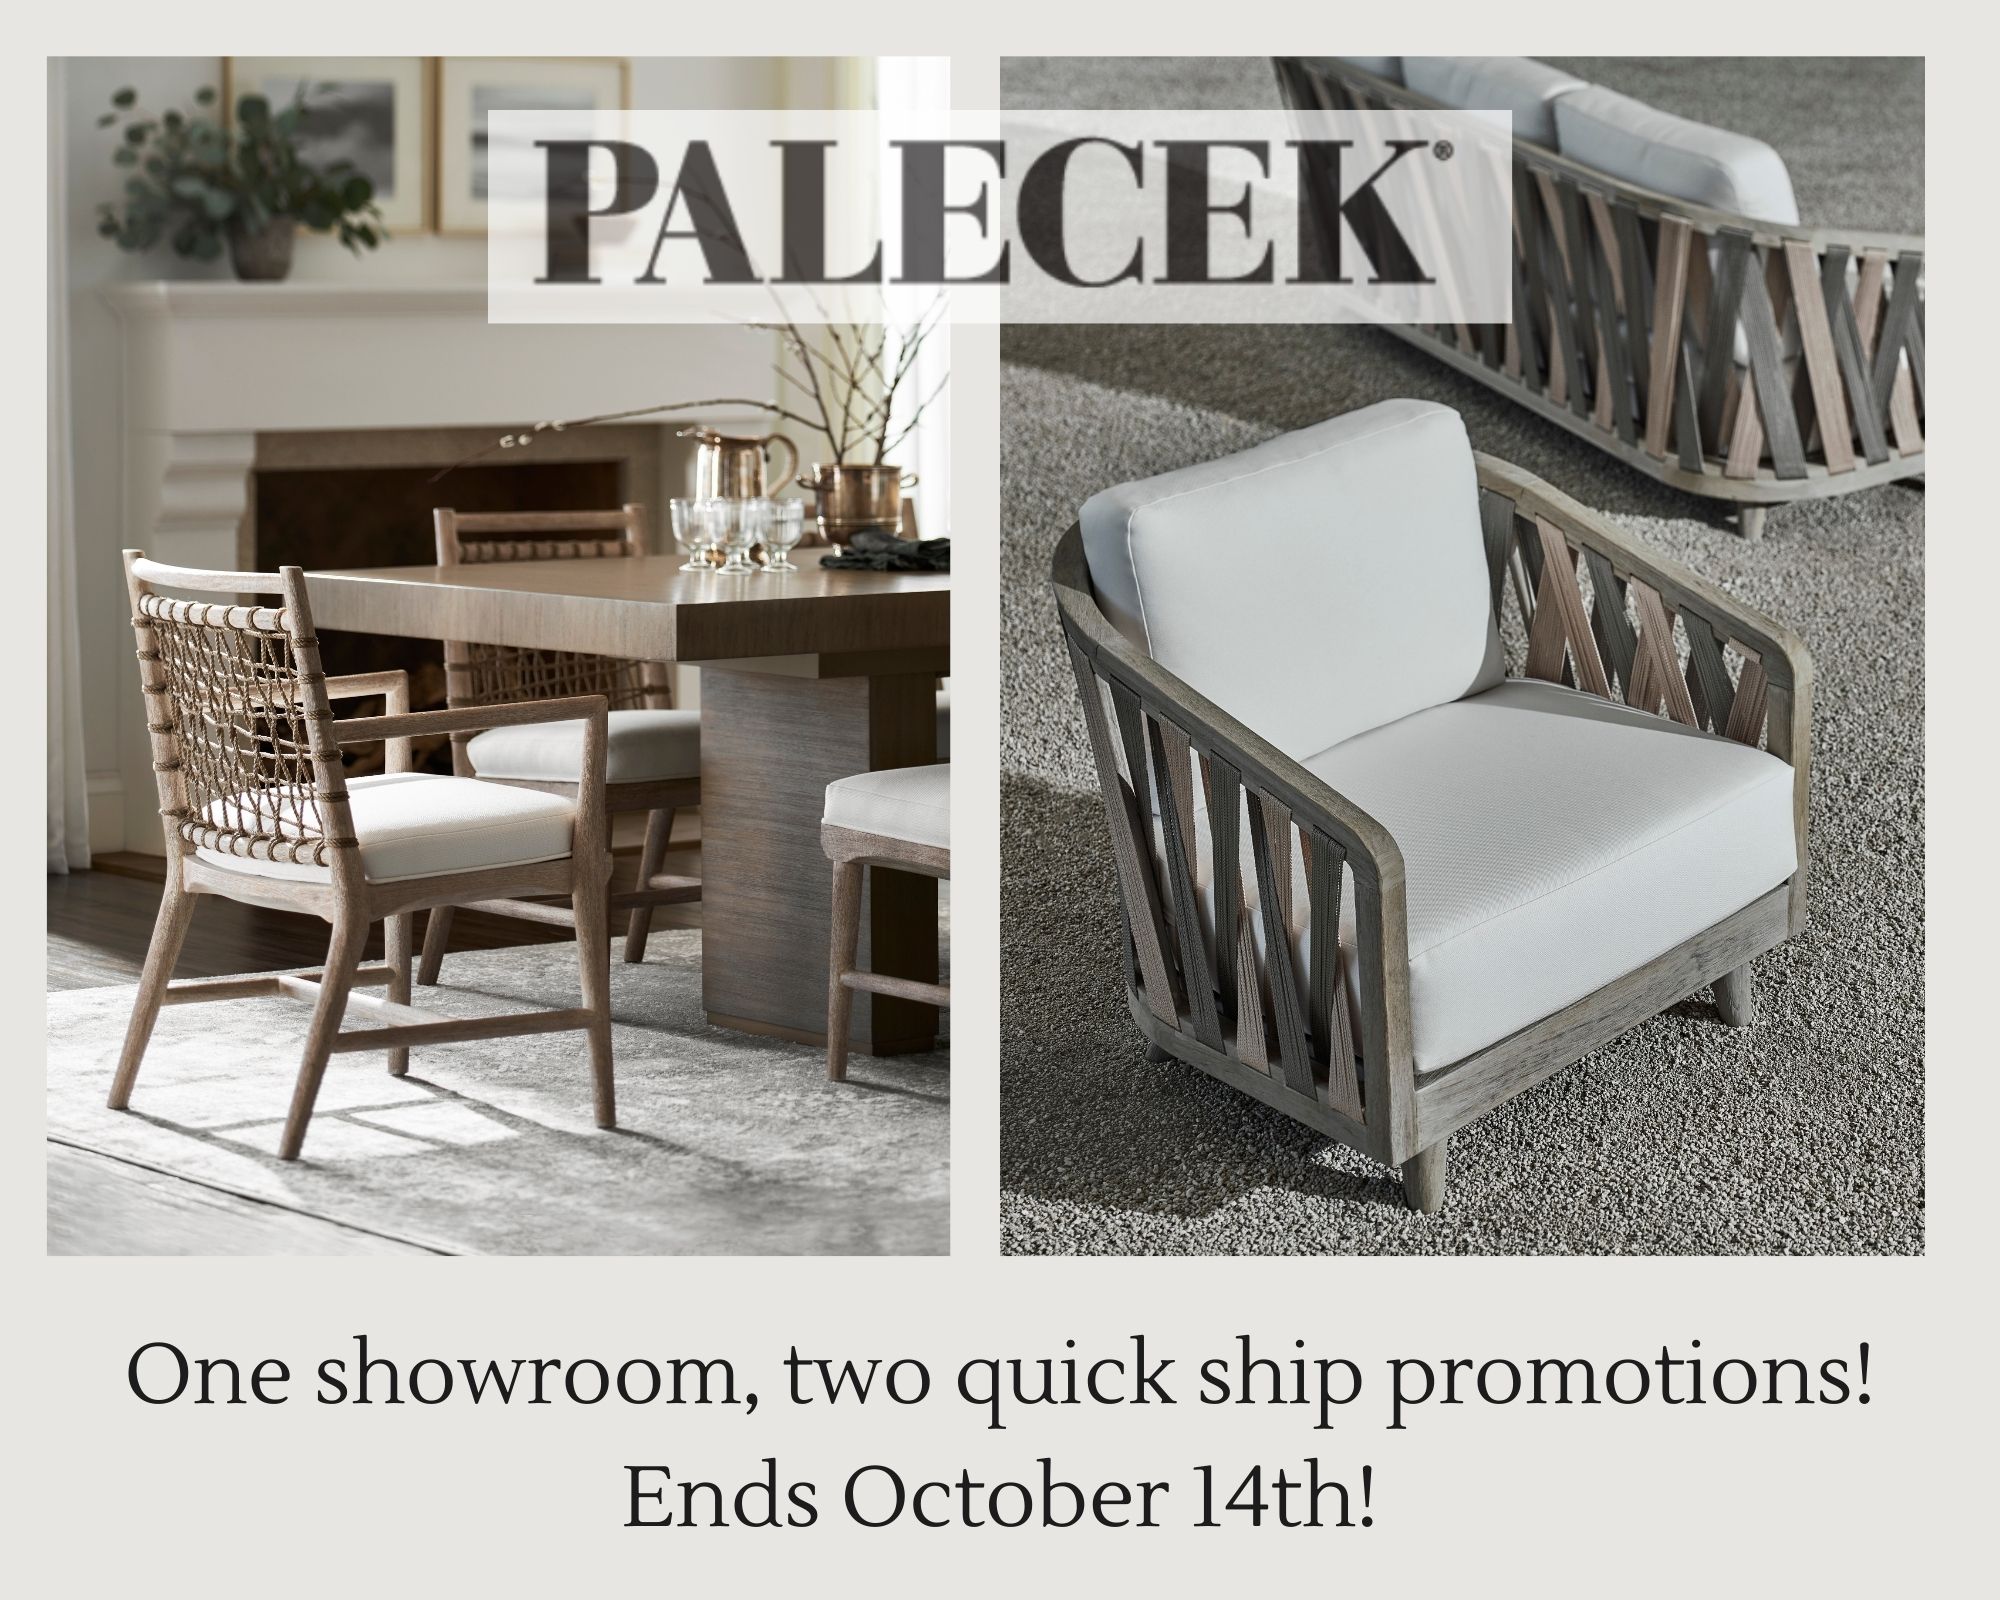 Get Ready for the Holidays with Quick Ship Promotions from the PALECEK Showroom - News from Laguna Design Center